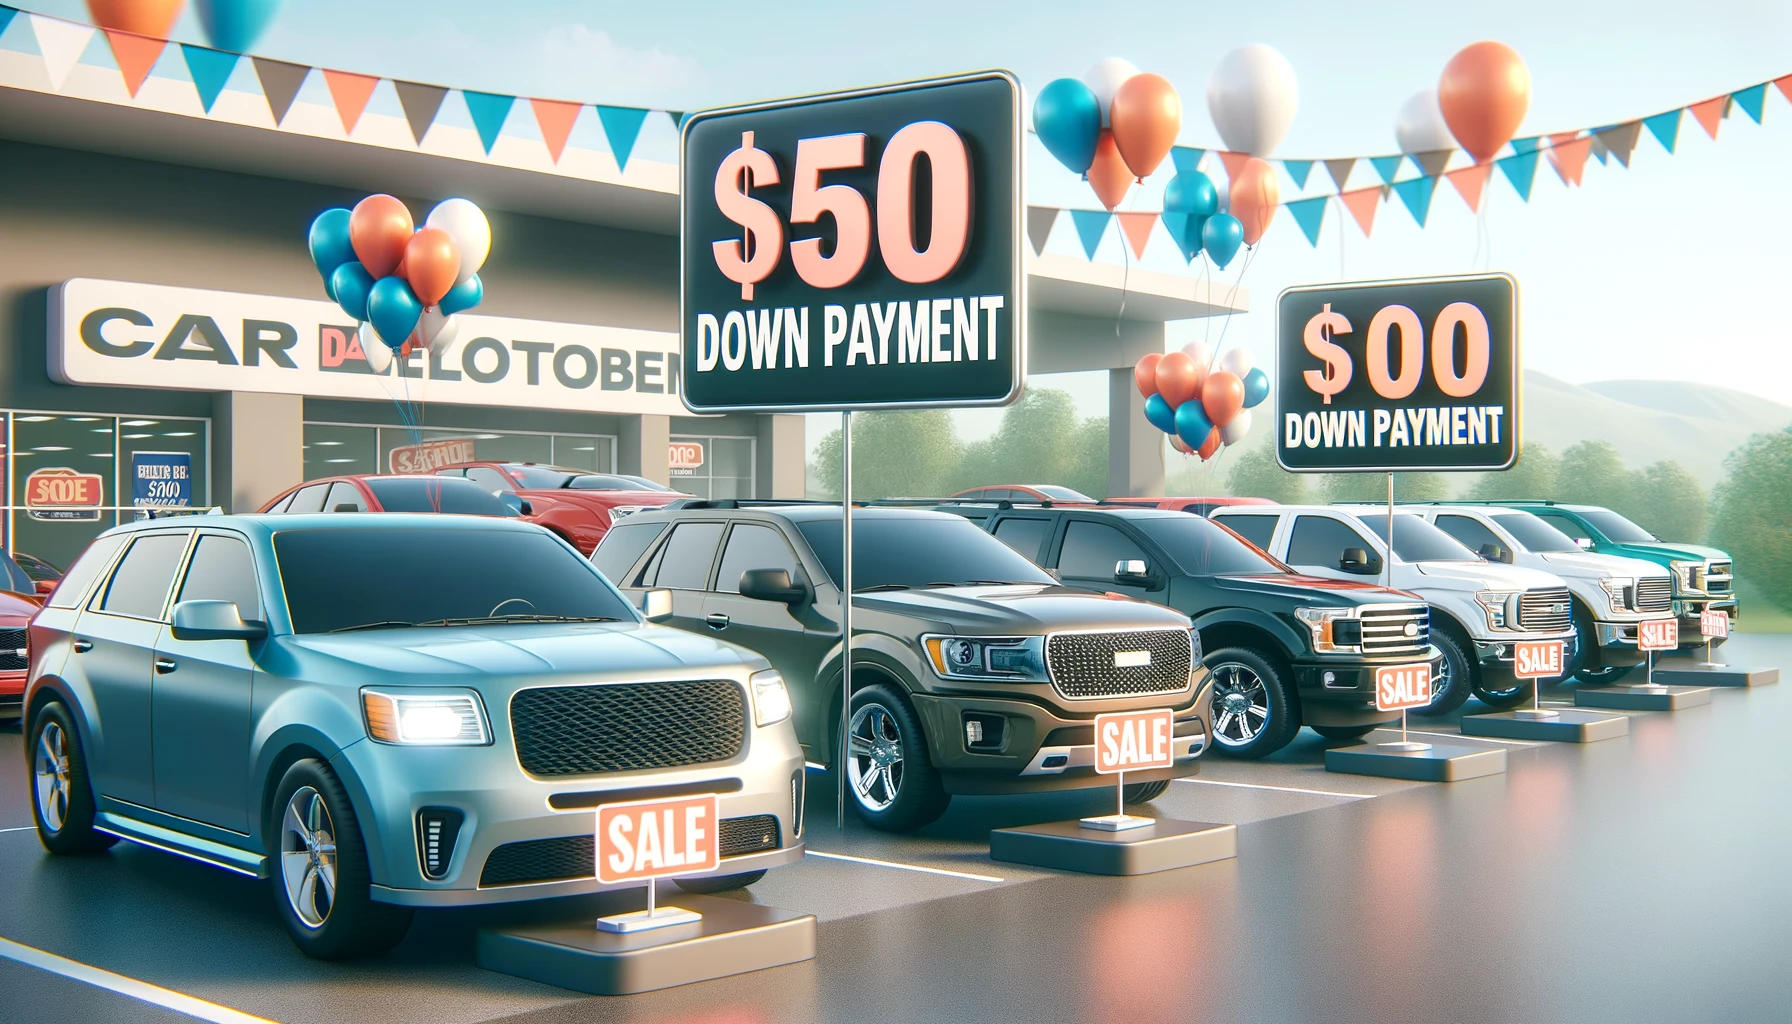 Exploring Affordable Car Options: Finding Cars for $500 Down Payment Near You.